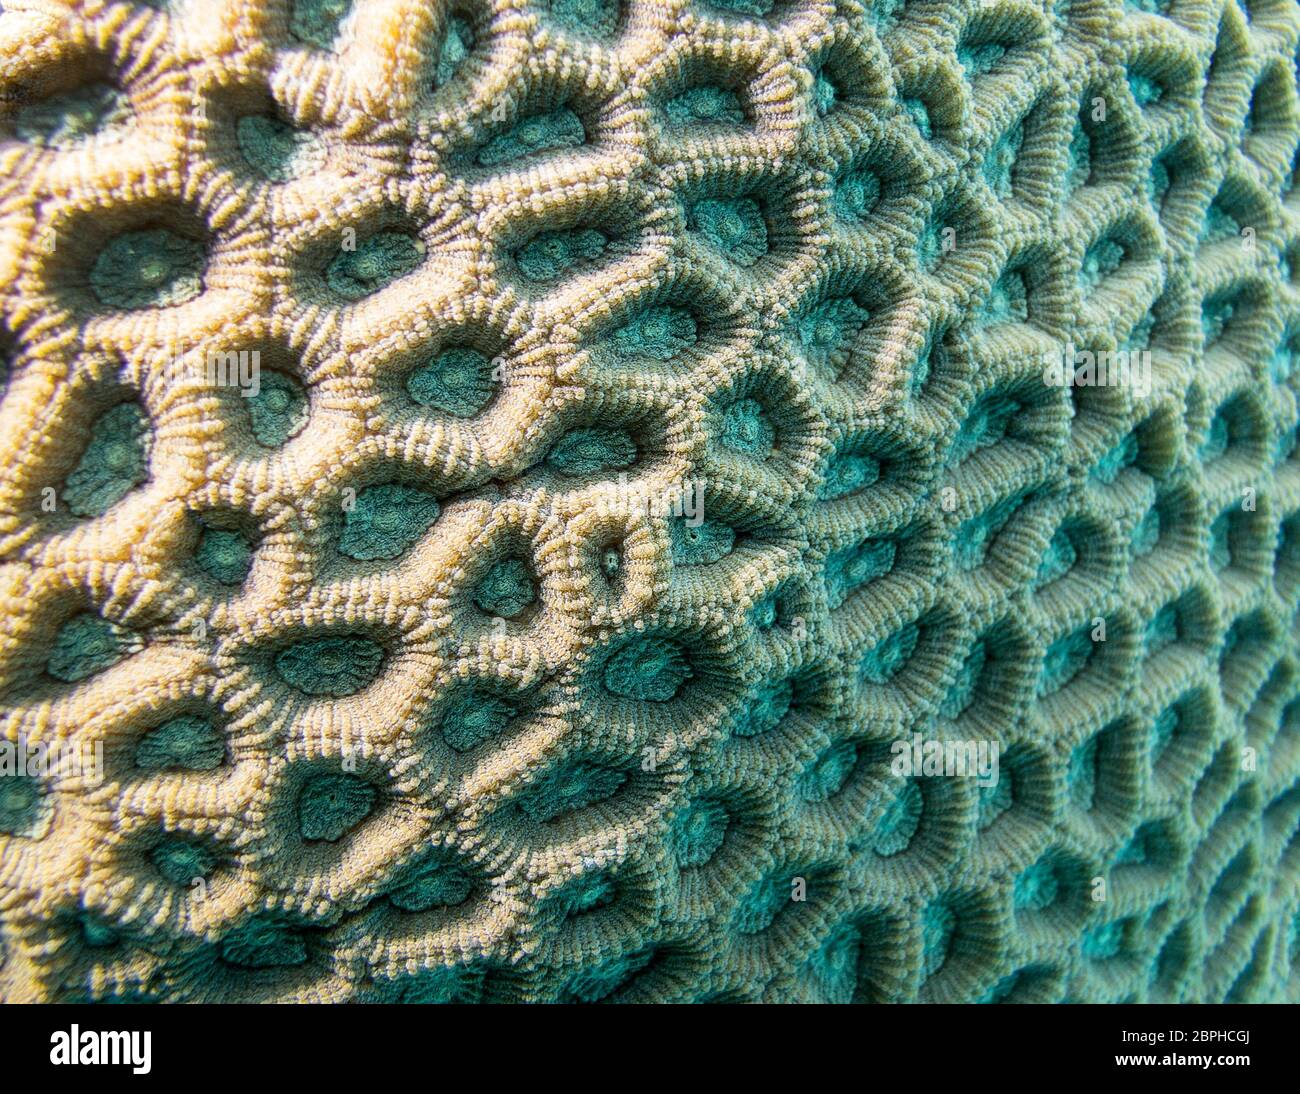 Colorful coral reef at the bottom of tropical sea, favia coral, close up, underwater landscape Stock Photo